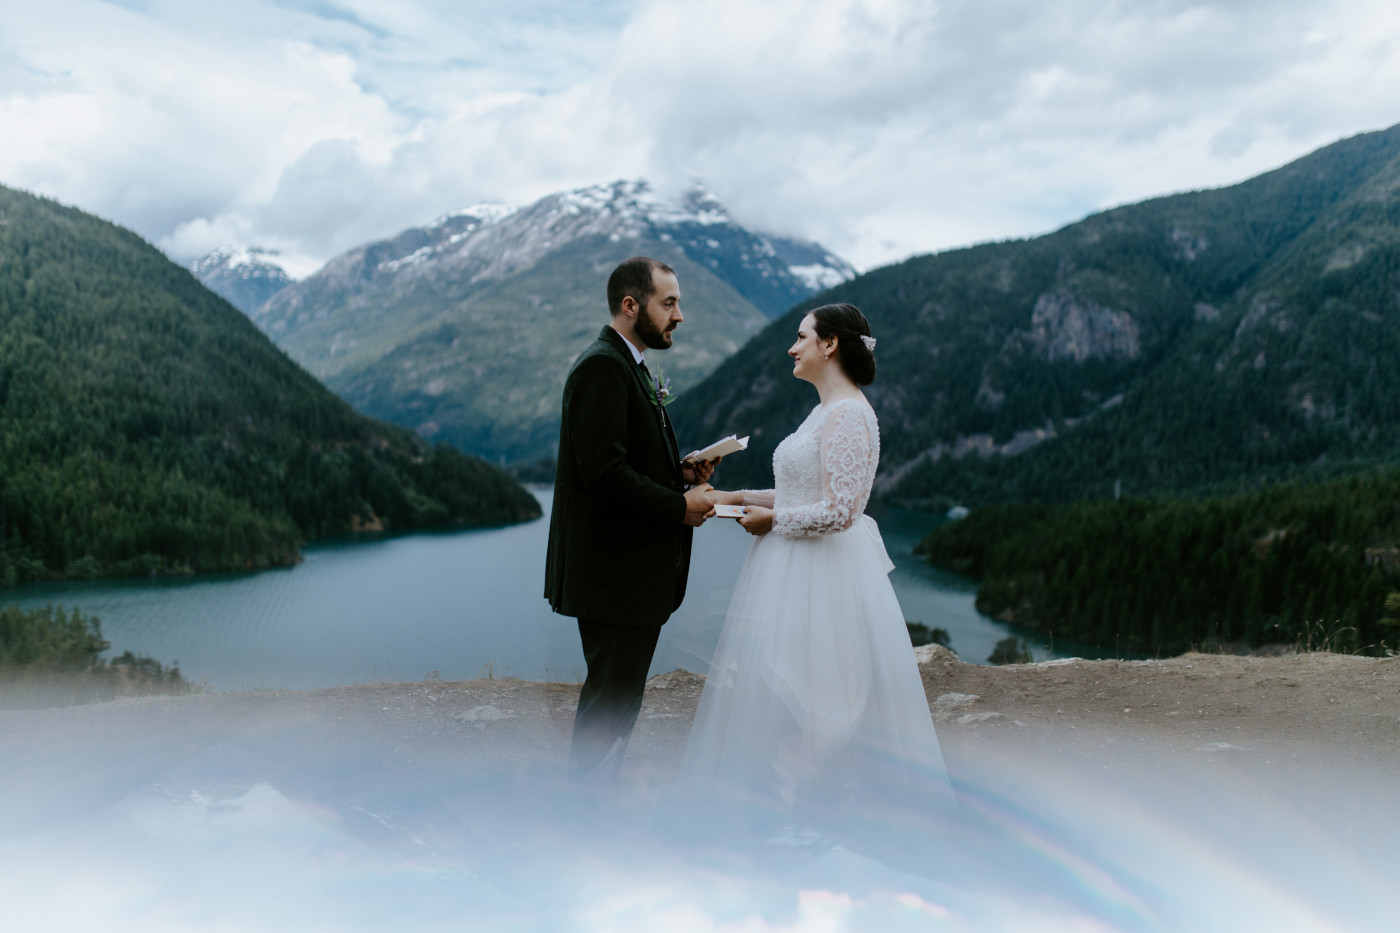 Elizabeth smiles at Alex during their elopement. Elopement photography at North Cascades National Park by Sienna Plus Josh.